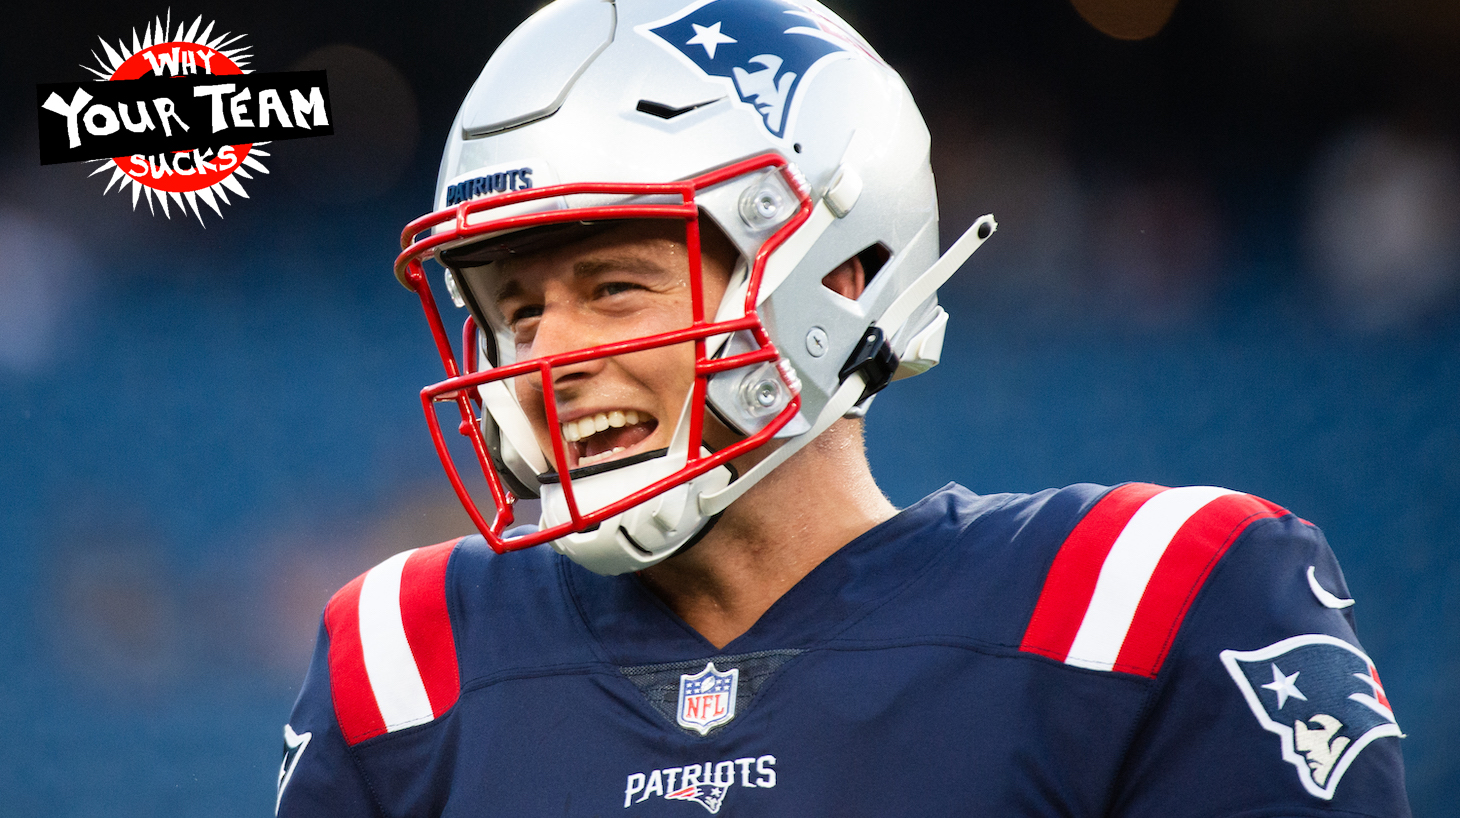 FOXBOROUGH, MA - AUGUST 12: Mac Jones #10 of the New England Patriots smiles during warm ups prior to the start of the game against the Washington Football Team at Gillette Stadium on August 12, 2021 in Foxborough, Massachusetts. (Photo by Kathryn Riley/Getty Images)